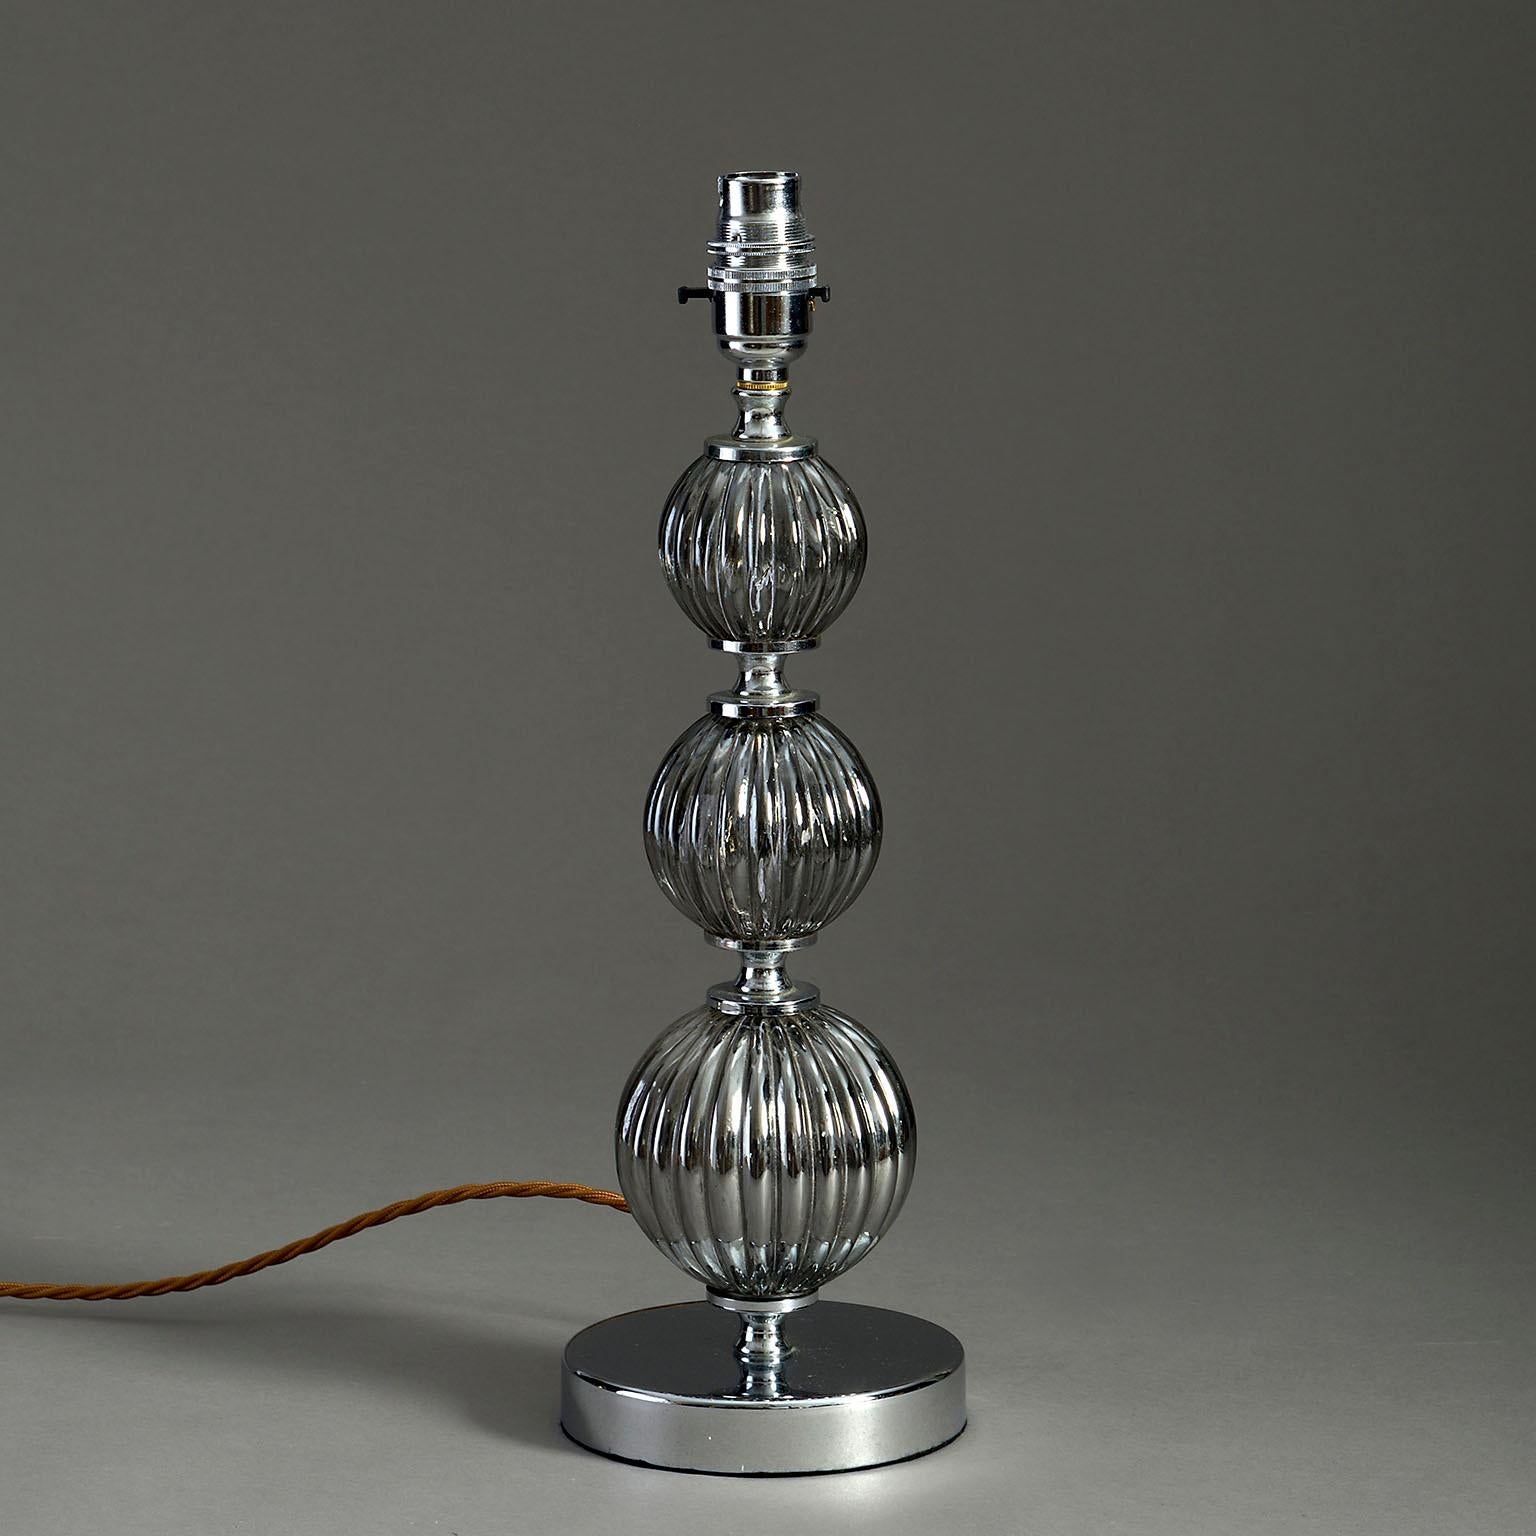 French Mid-20th Century Modernist Glass & Chrome Table Lamp For Sale